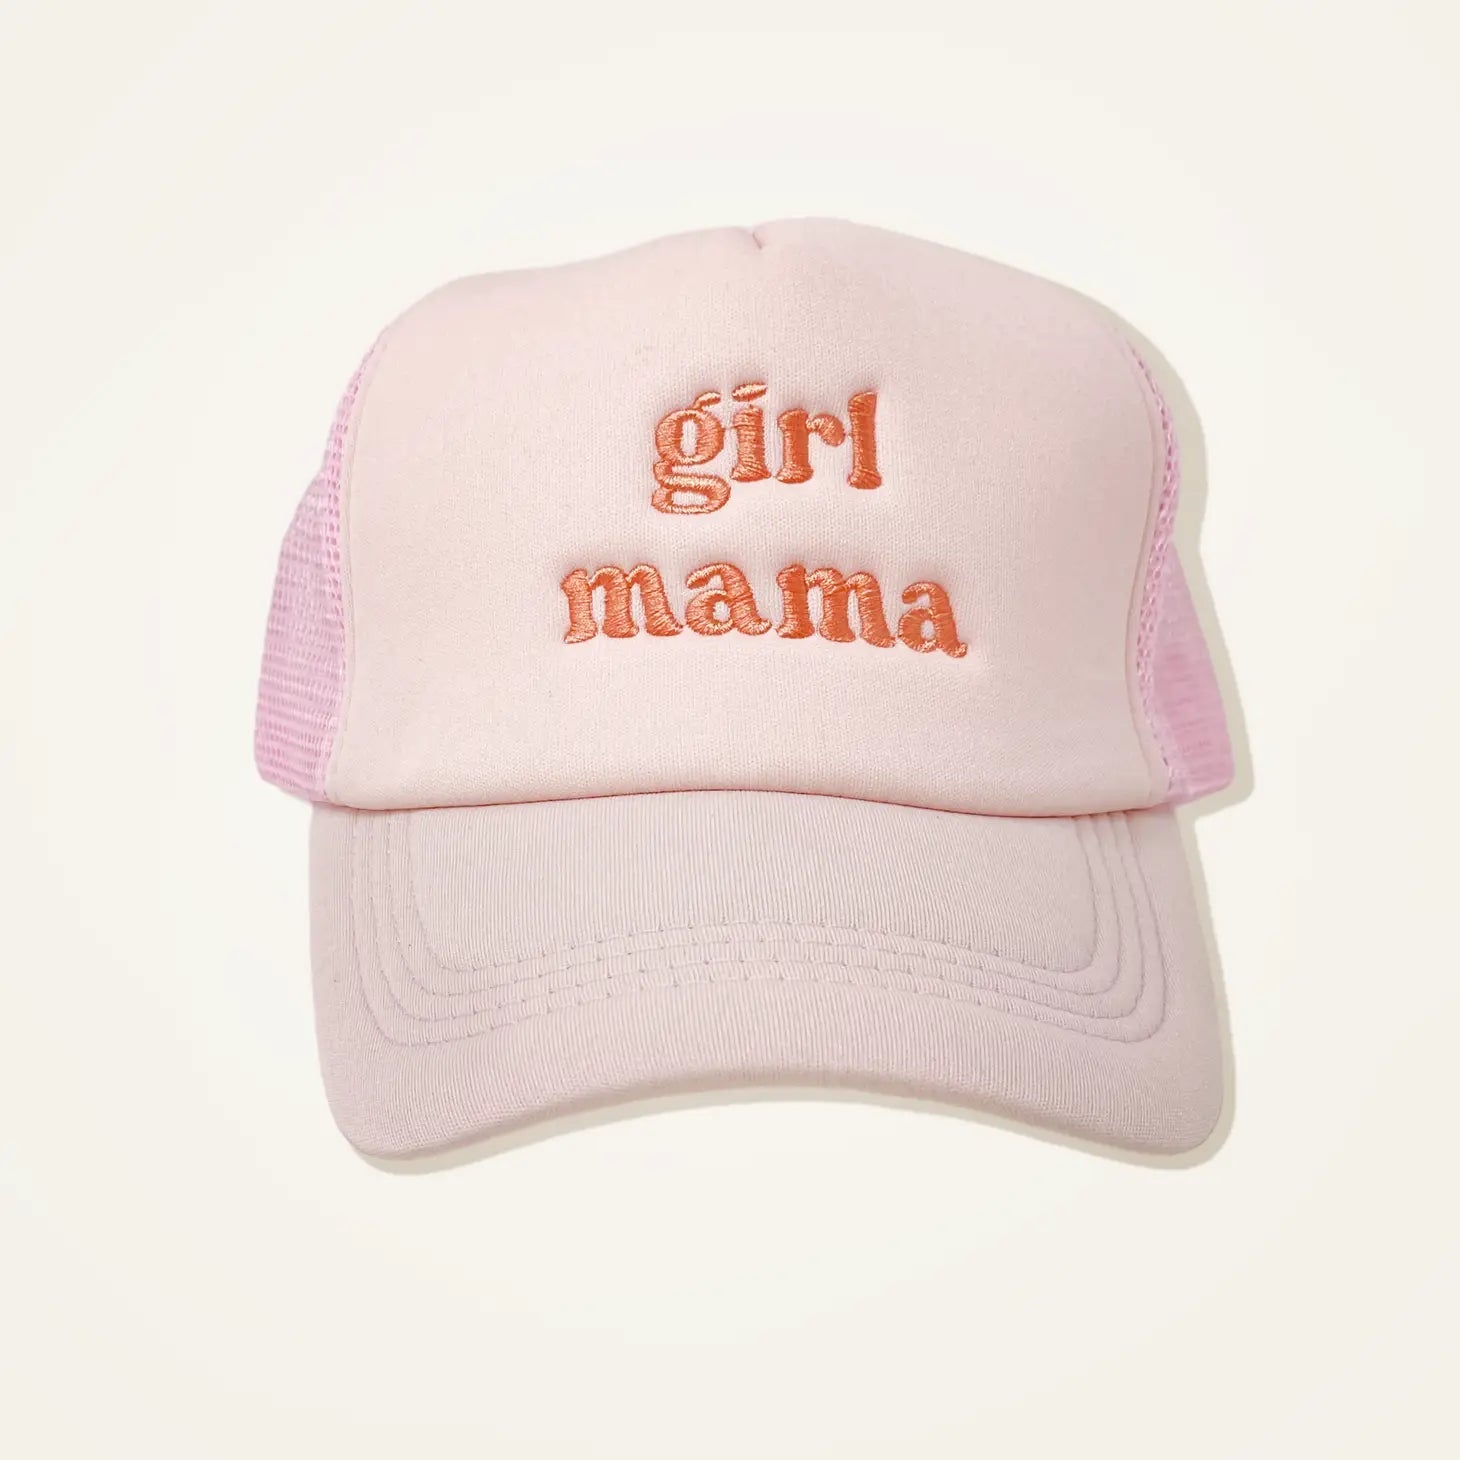 Girl Mama Trucker Hat 193 GIFT PARENT The Darling Effect 